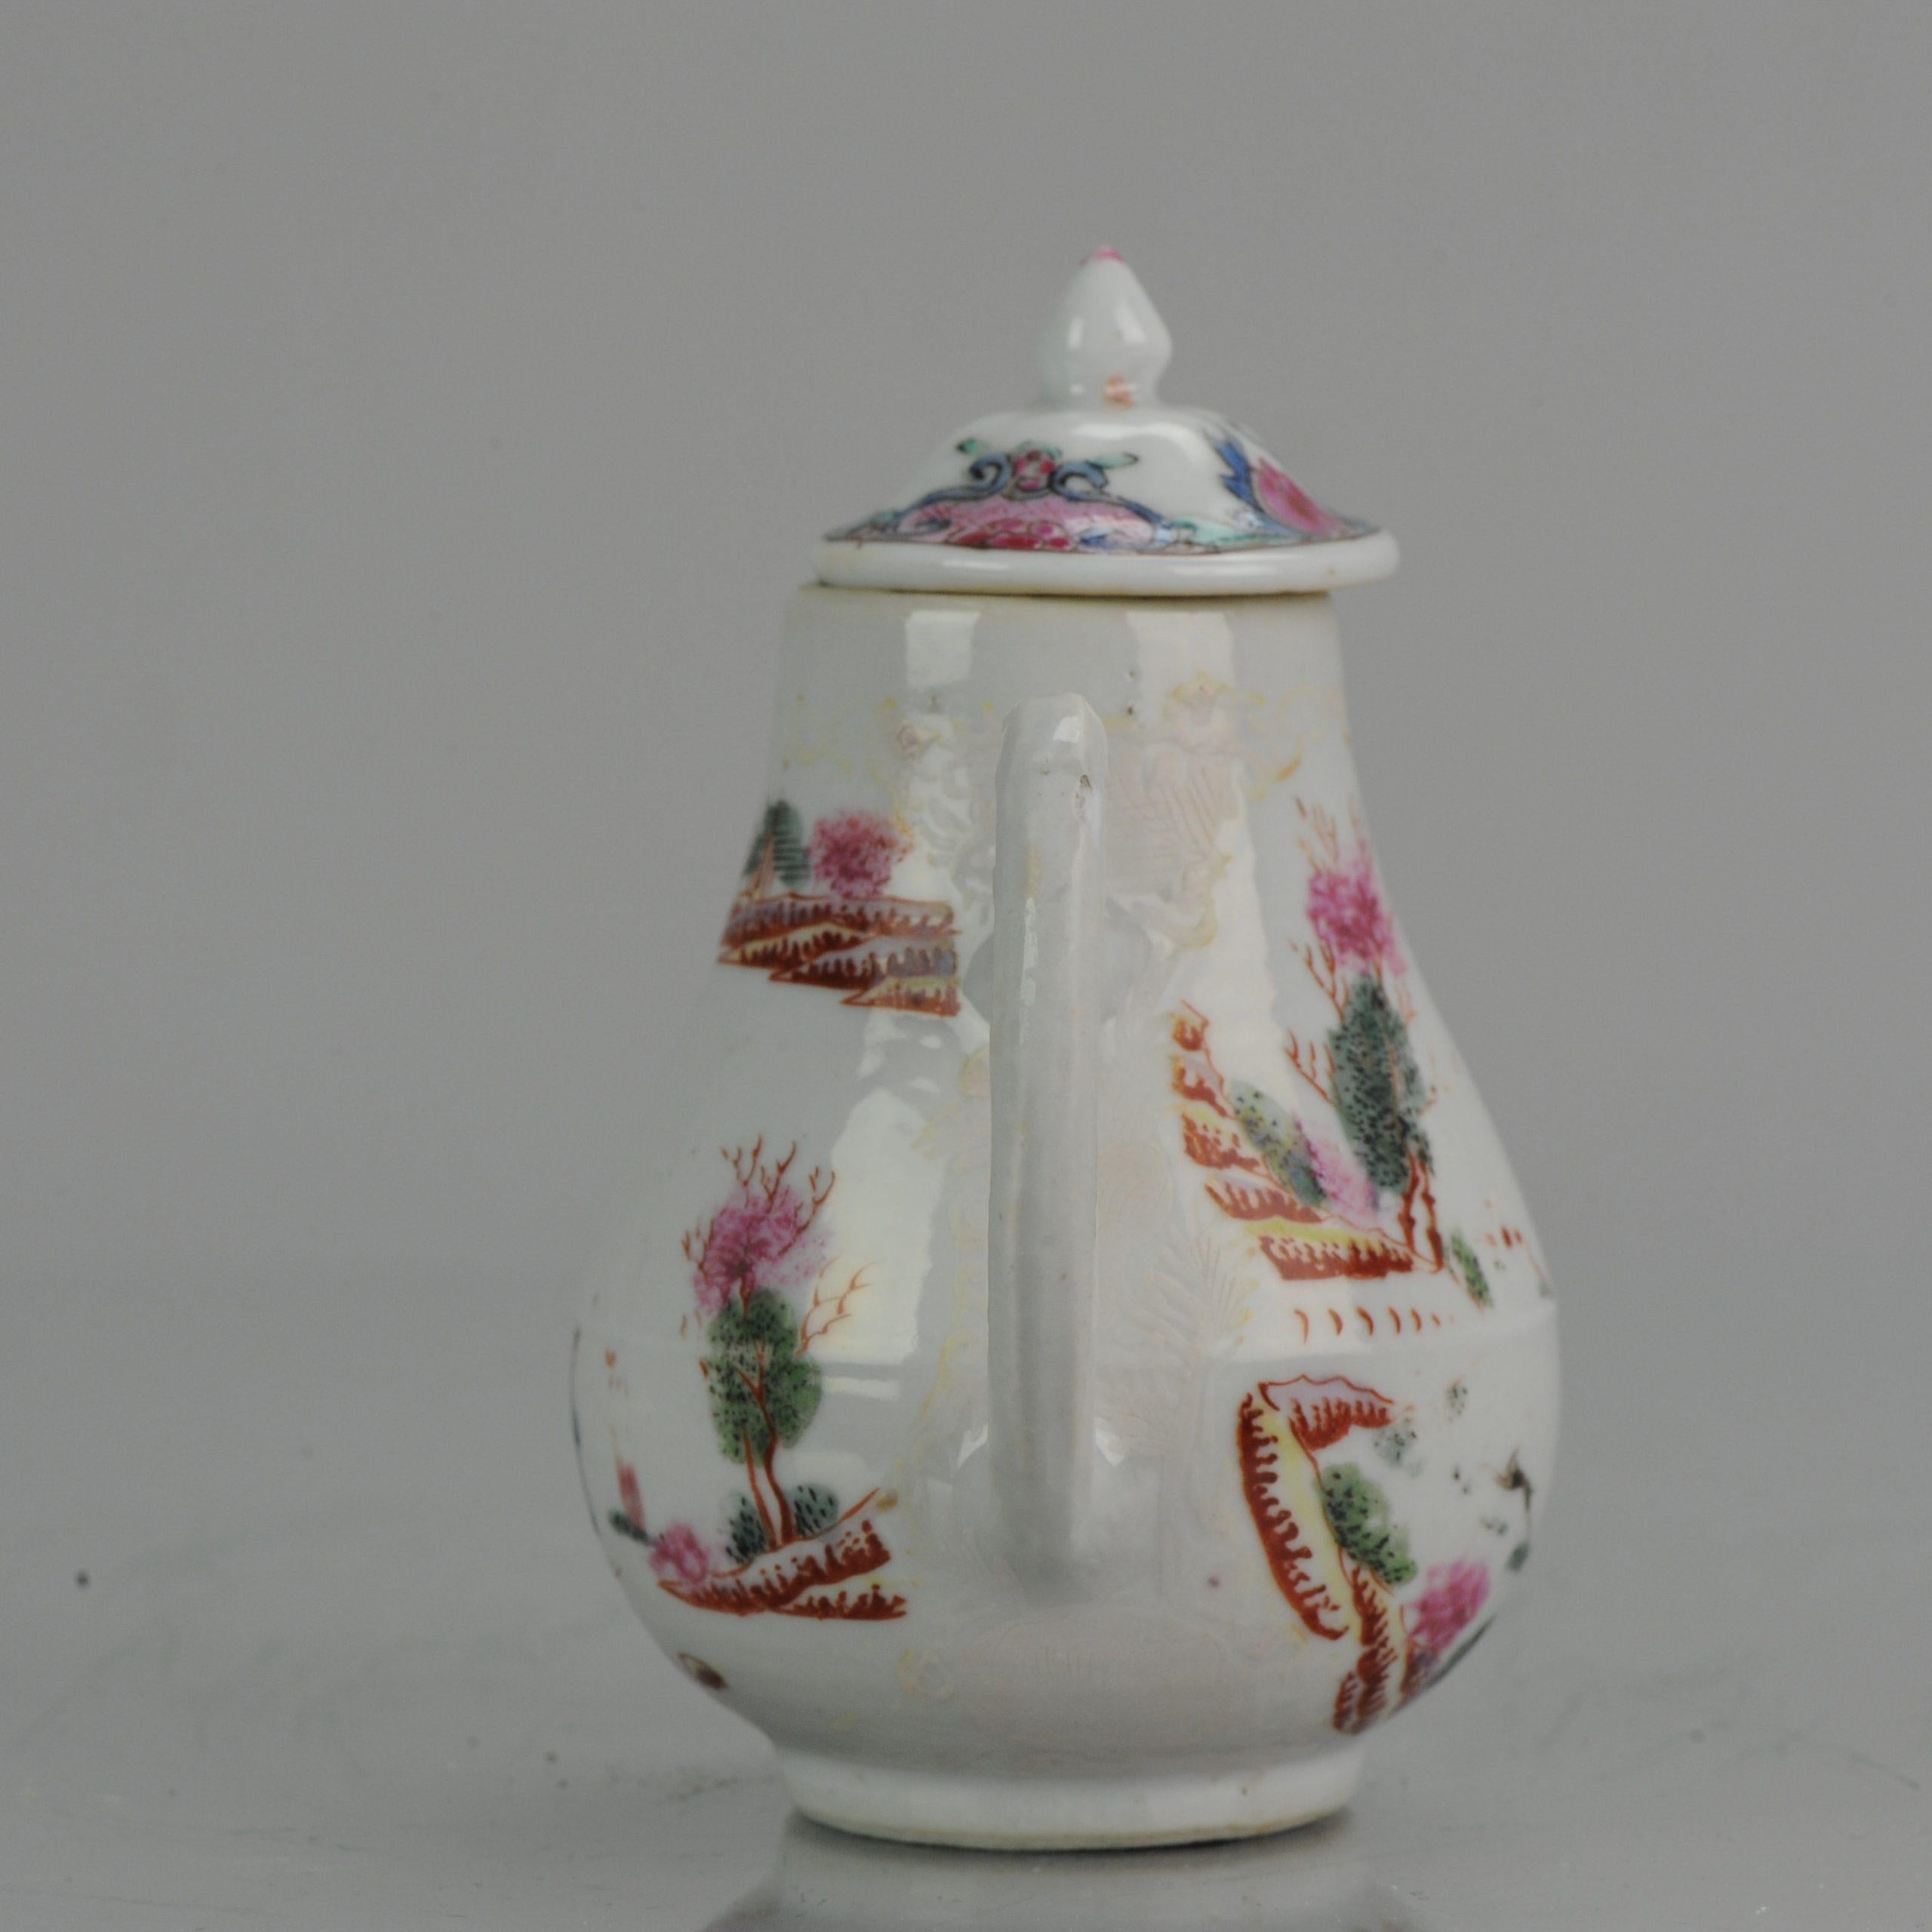 A rare Chine de Commande creamer.

Possibly the lid is not matching.

Additional information:
Material: Porcelain & Pottery
Region of Origin: China
Period: 18th century, 19th century Qing (1661 - 1912)
Condition: Overall Condition 2 fritspots to the